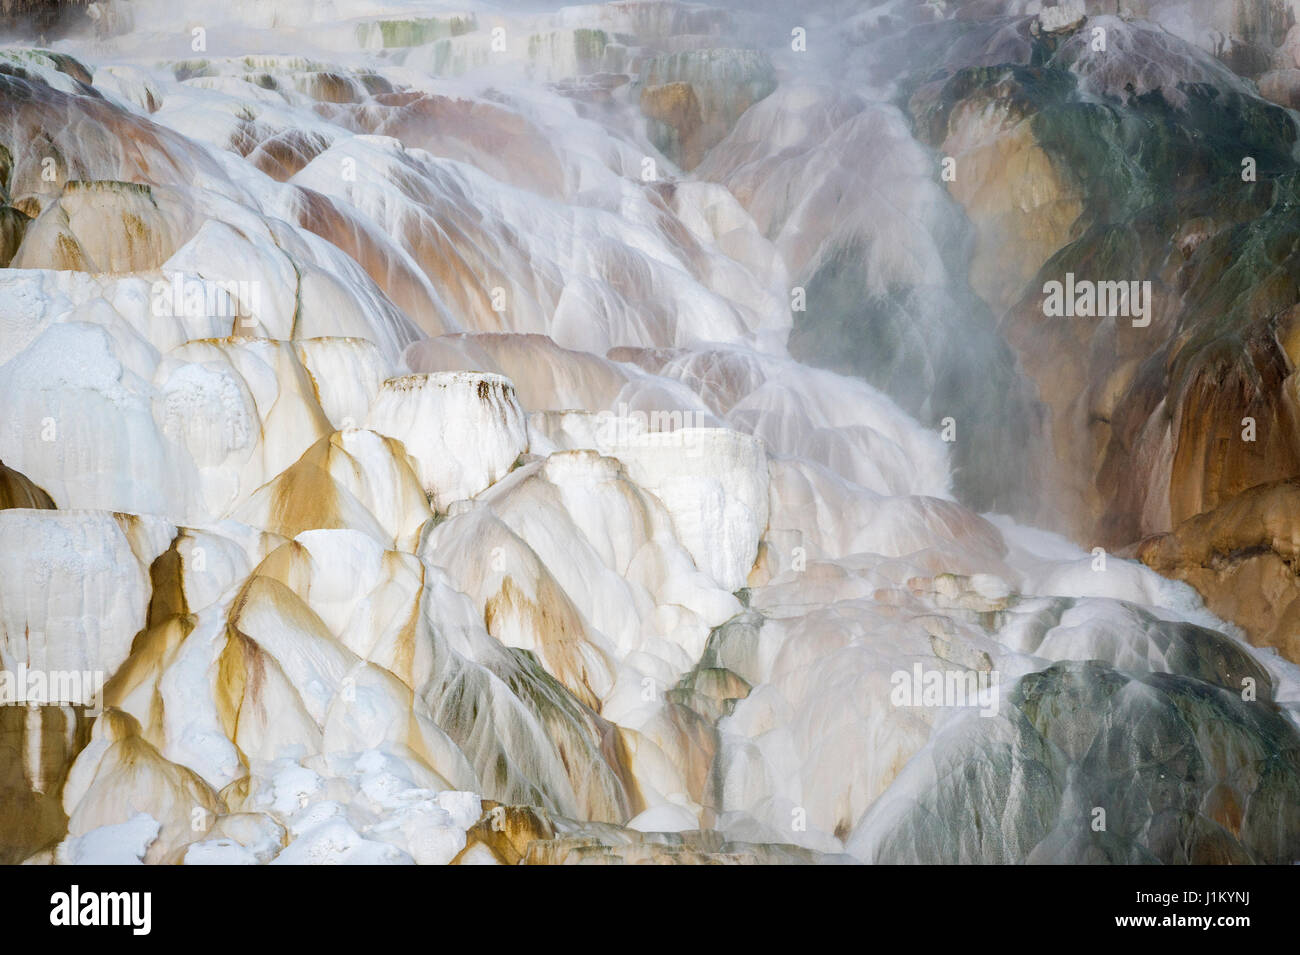 Mammoth Hot Springs in winter, famous colorful travertine terraces, UNESCO World Heritage, Yellowstone Natinal Park, Wyoming, USA. Stock Photo